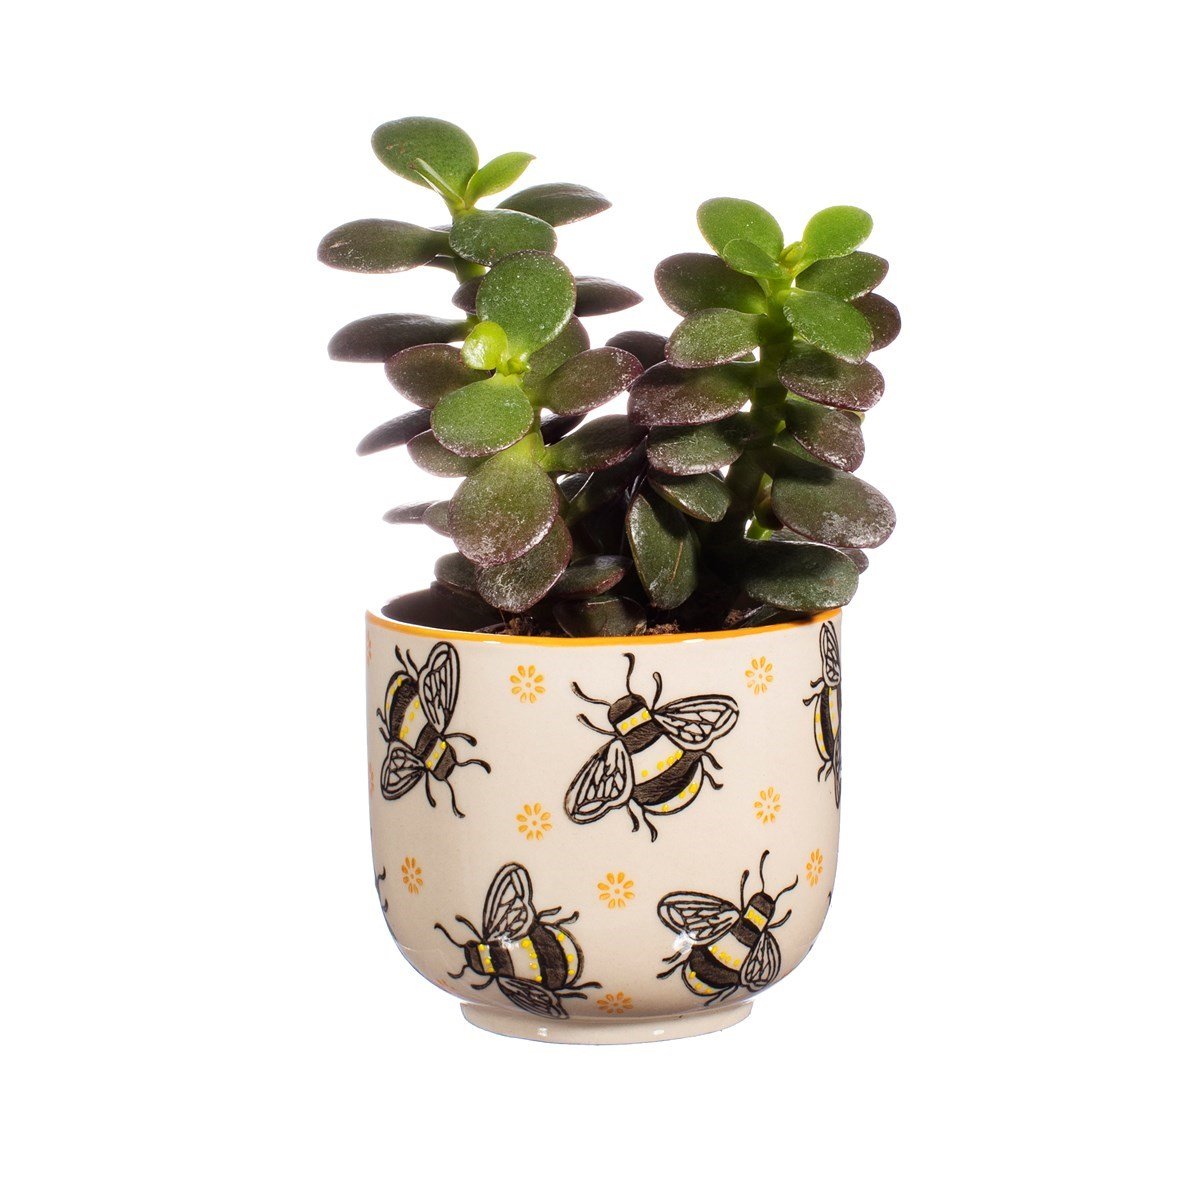 Busy Bees Small Planter - a Cheeky Plant